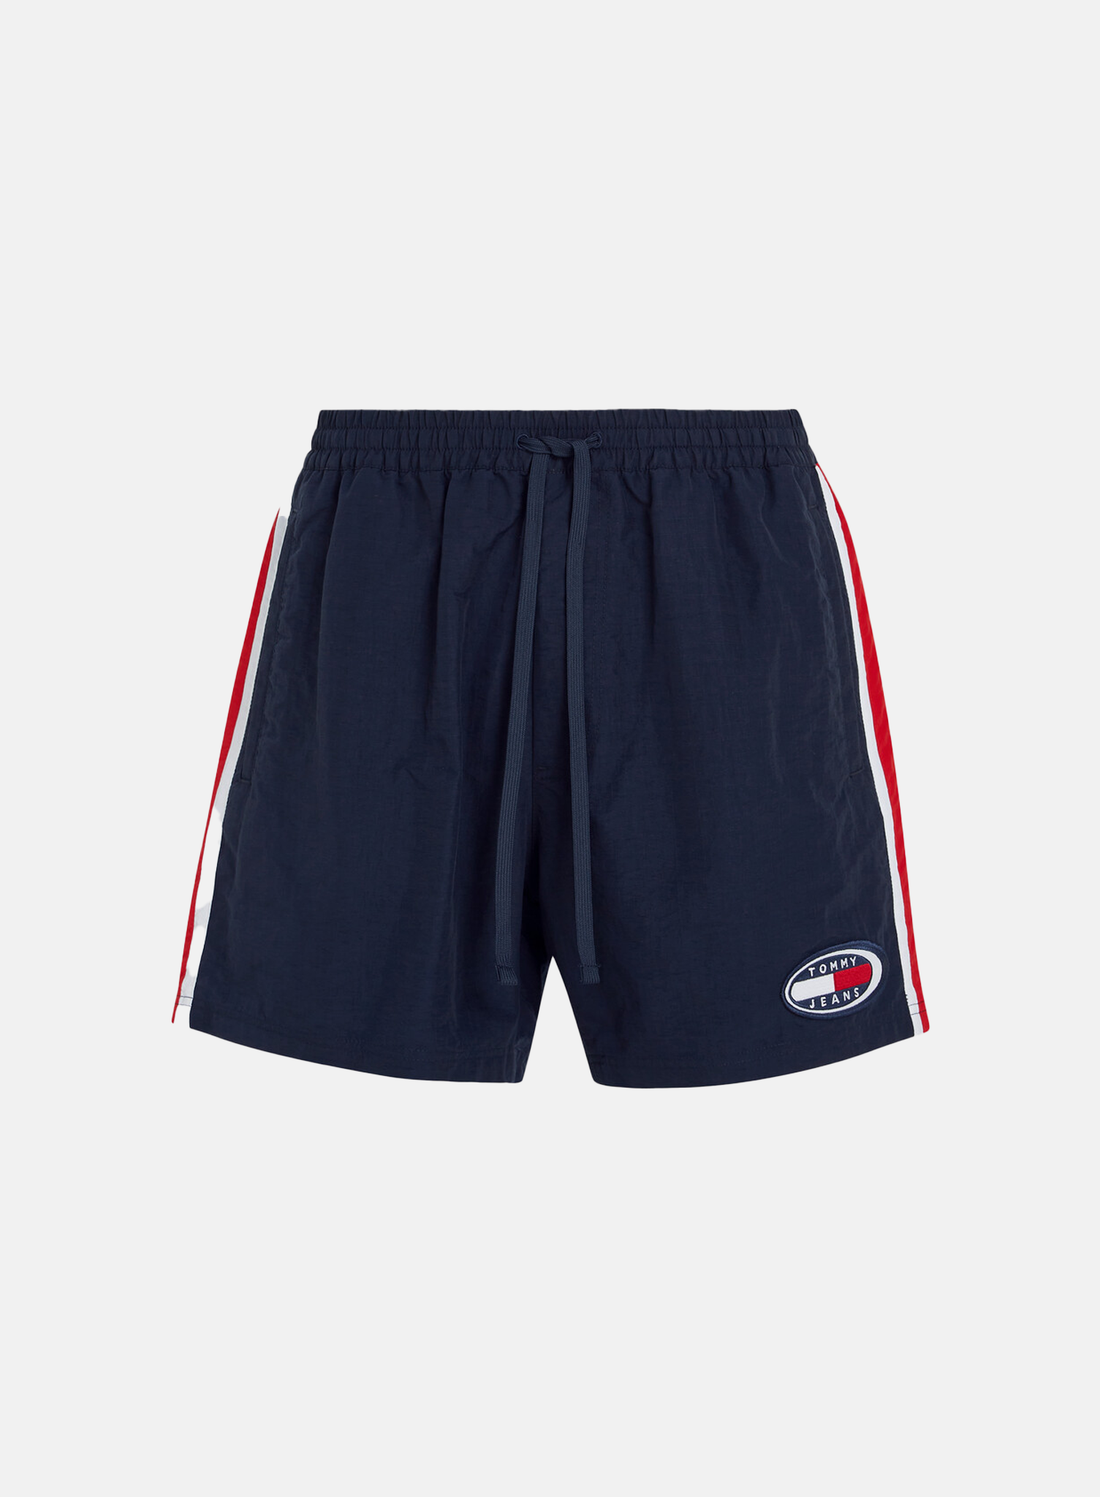 Tommy Jeans Archive Beach Short - Hympala Store 